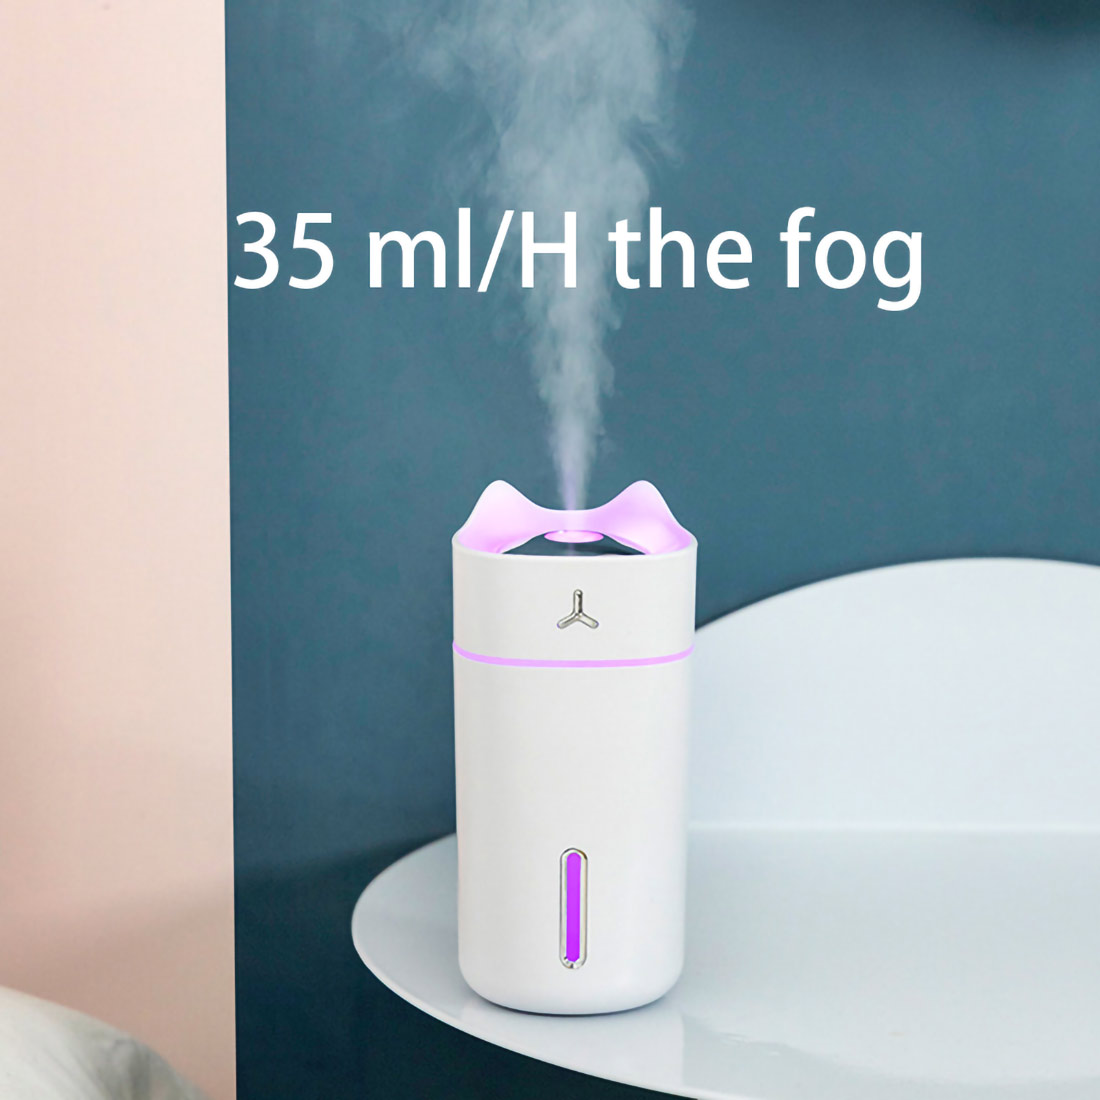 Humidifier Definition swab replacement ;